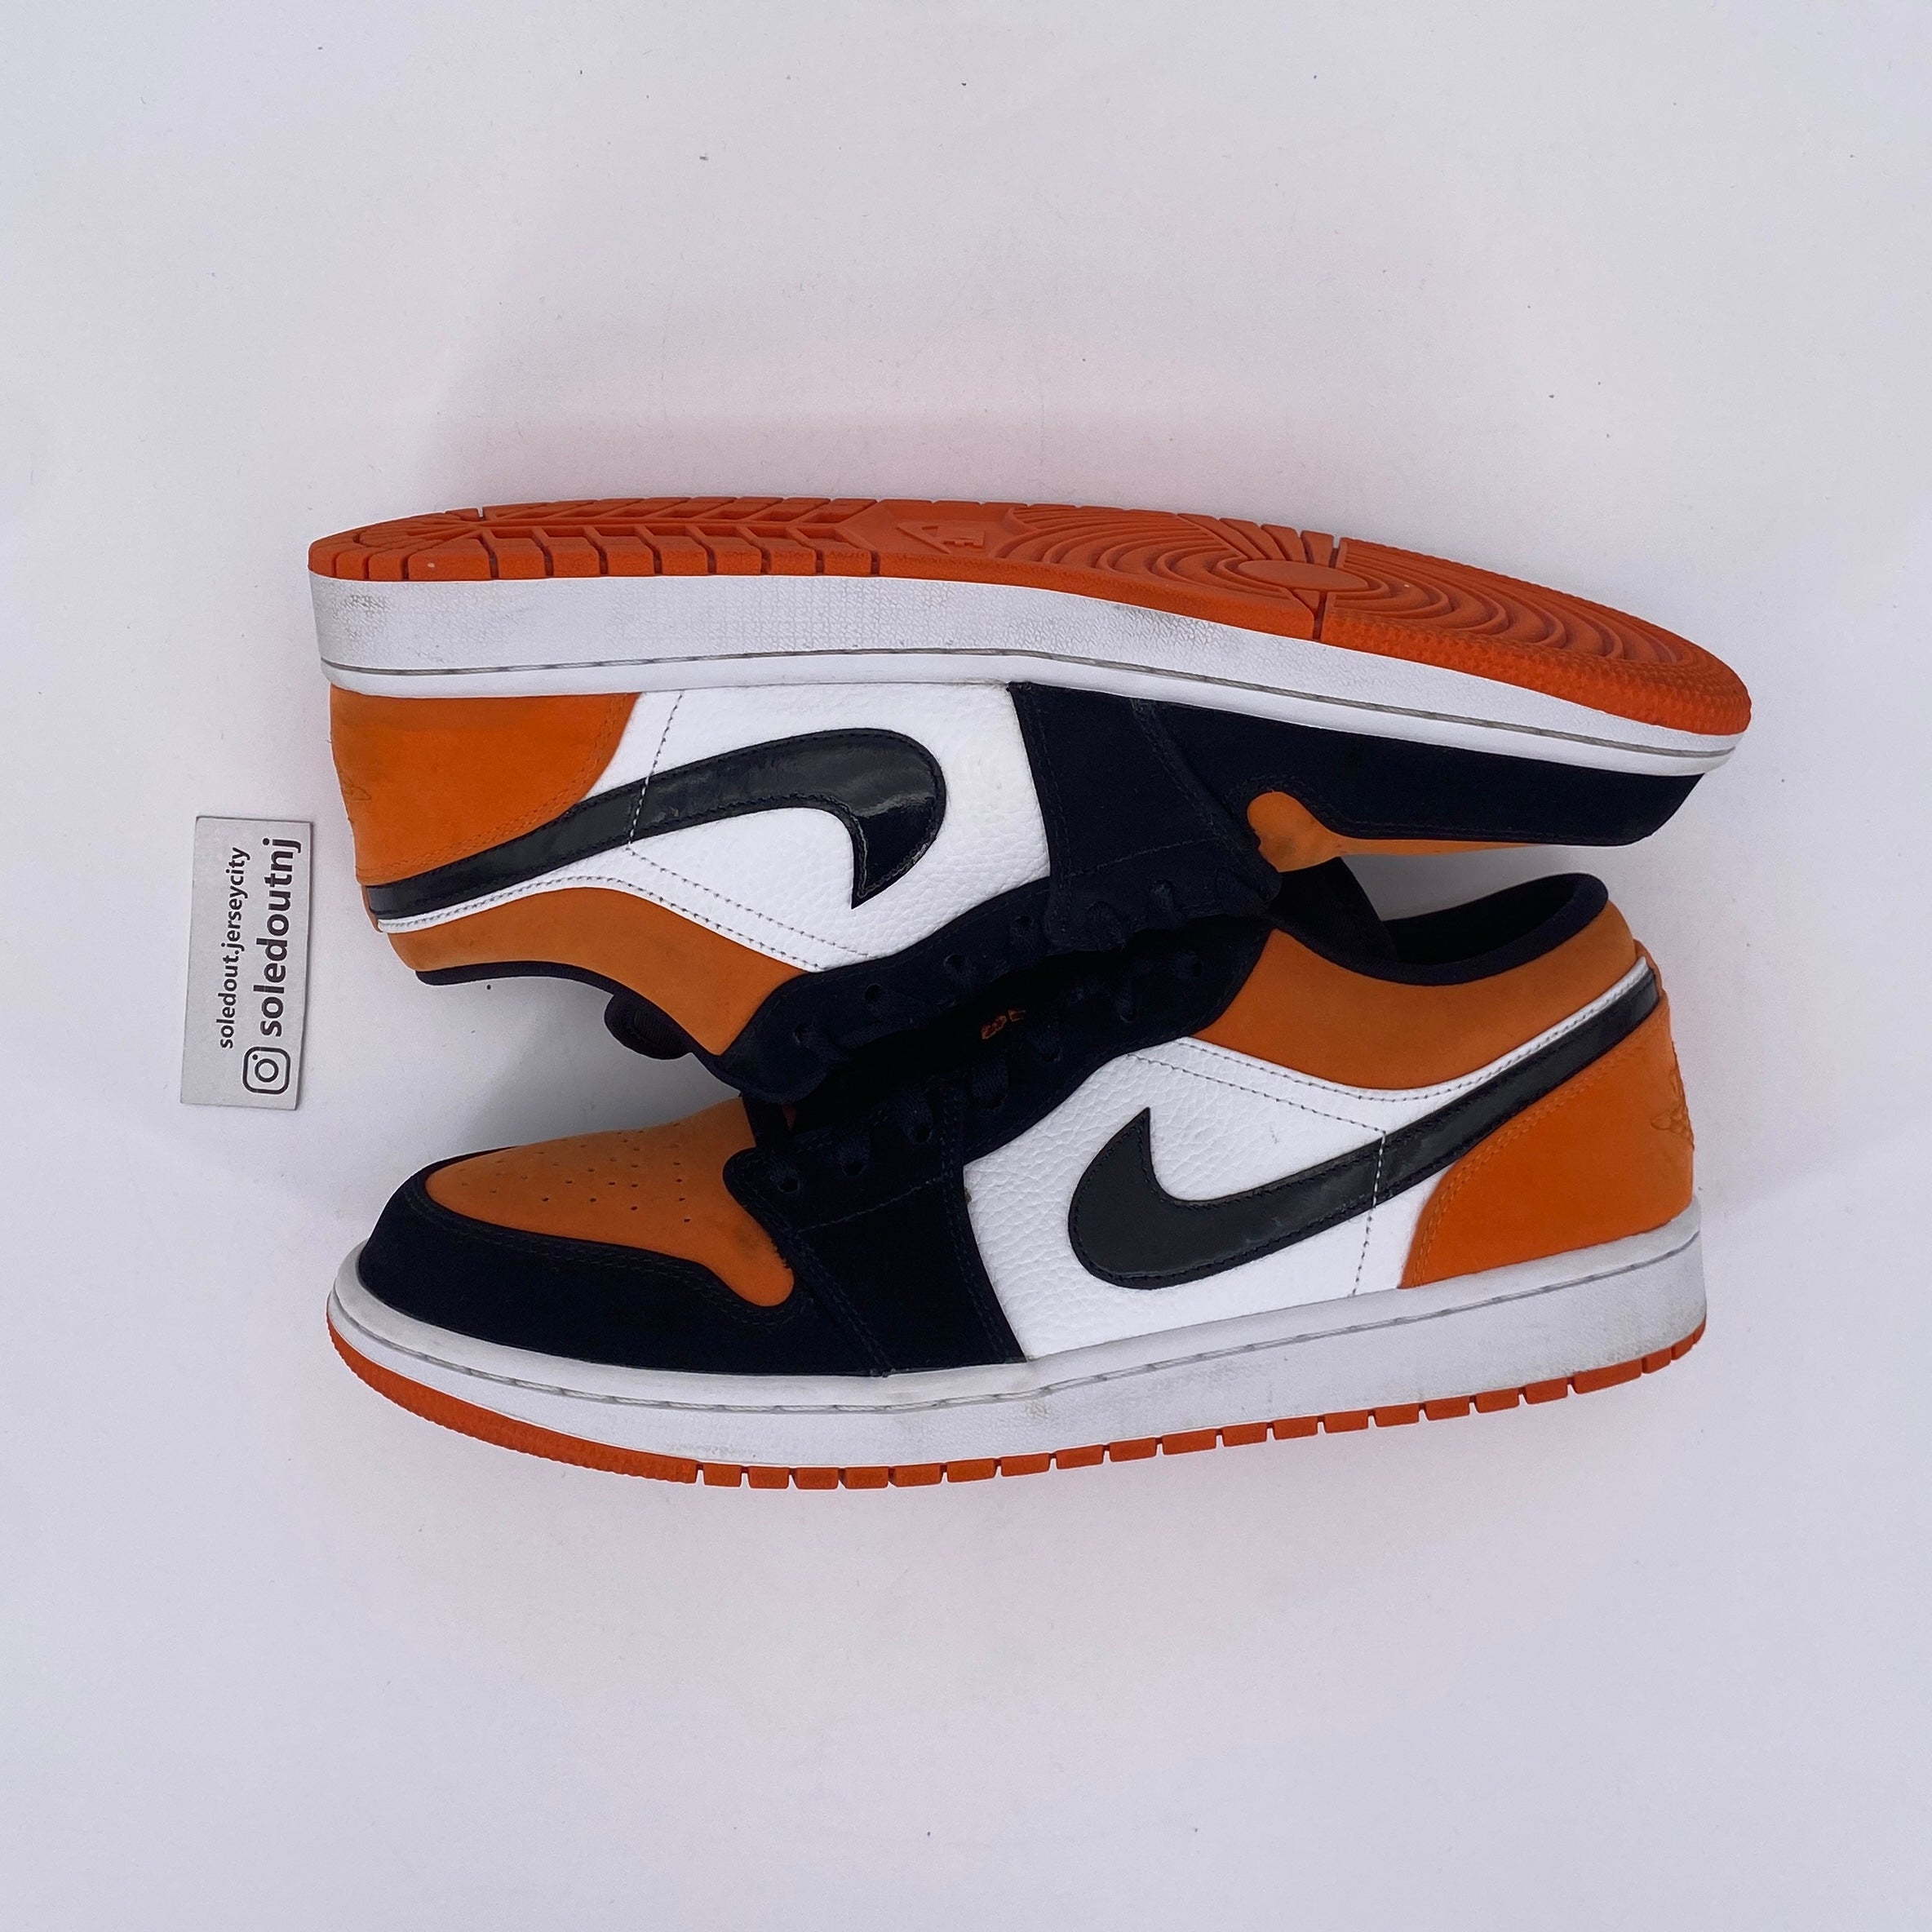 Air Jordan 1 Low &quot;Shattered Backboard&quot; 2021 Used Size 11.5